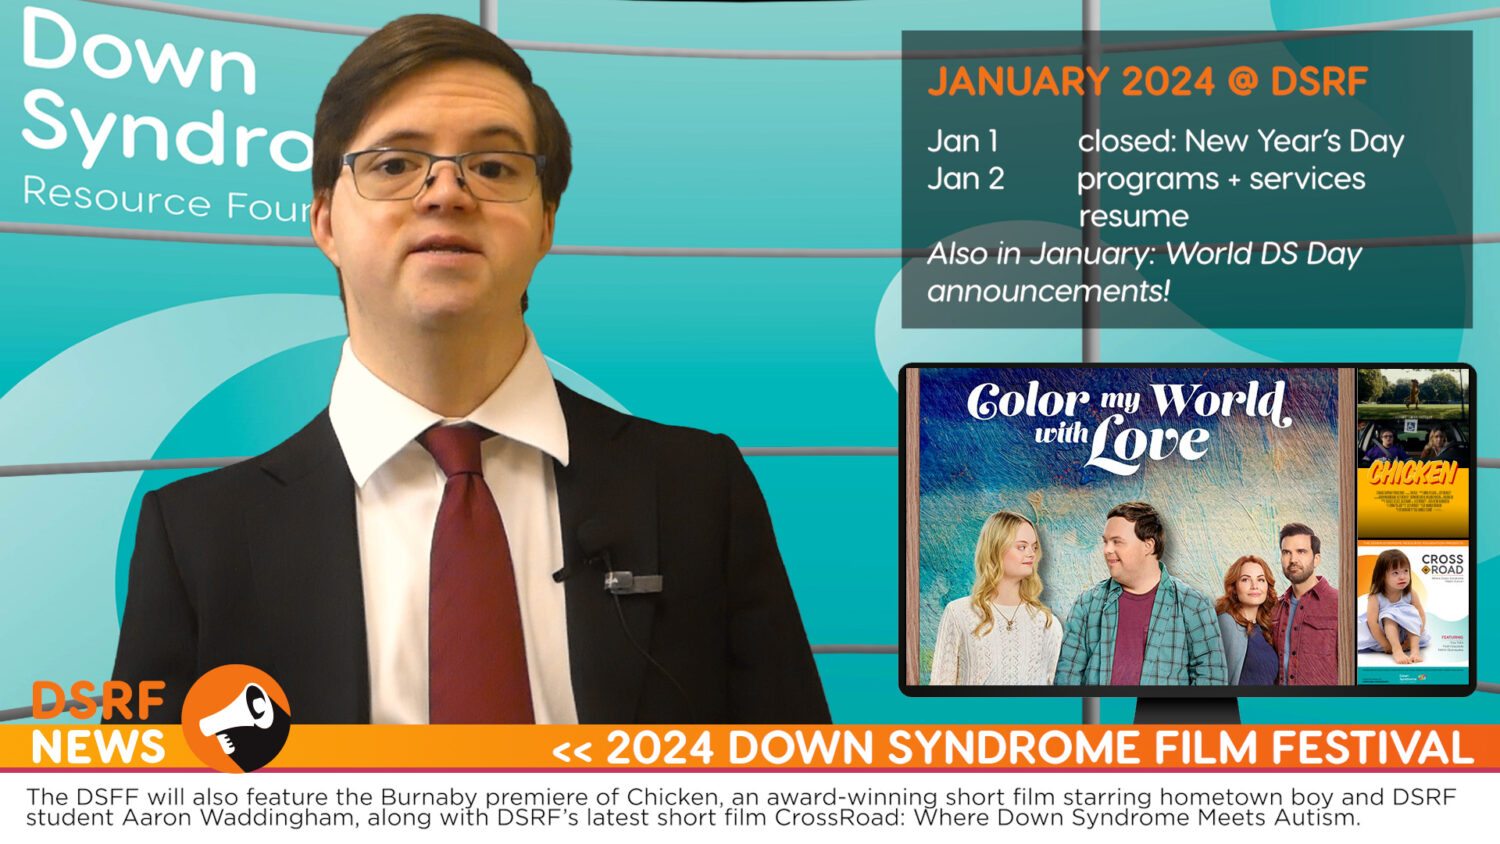 white man with Down syndrome, with brown hair, glasses, red tie, and black suit delivers newscast from virtual news studio